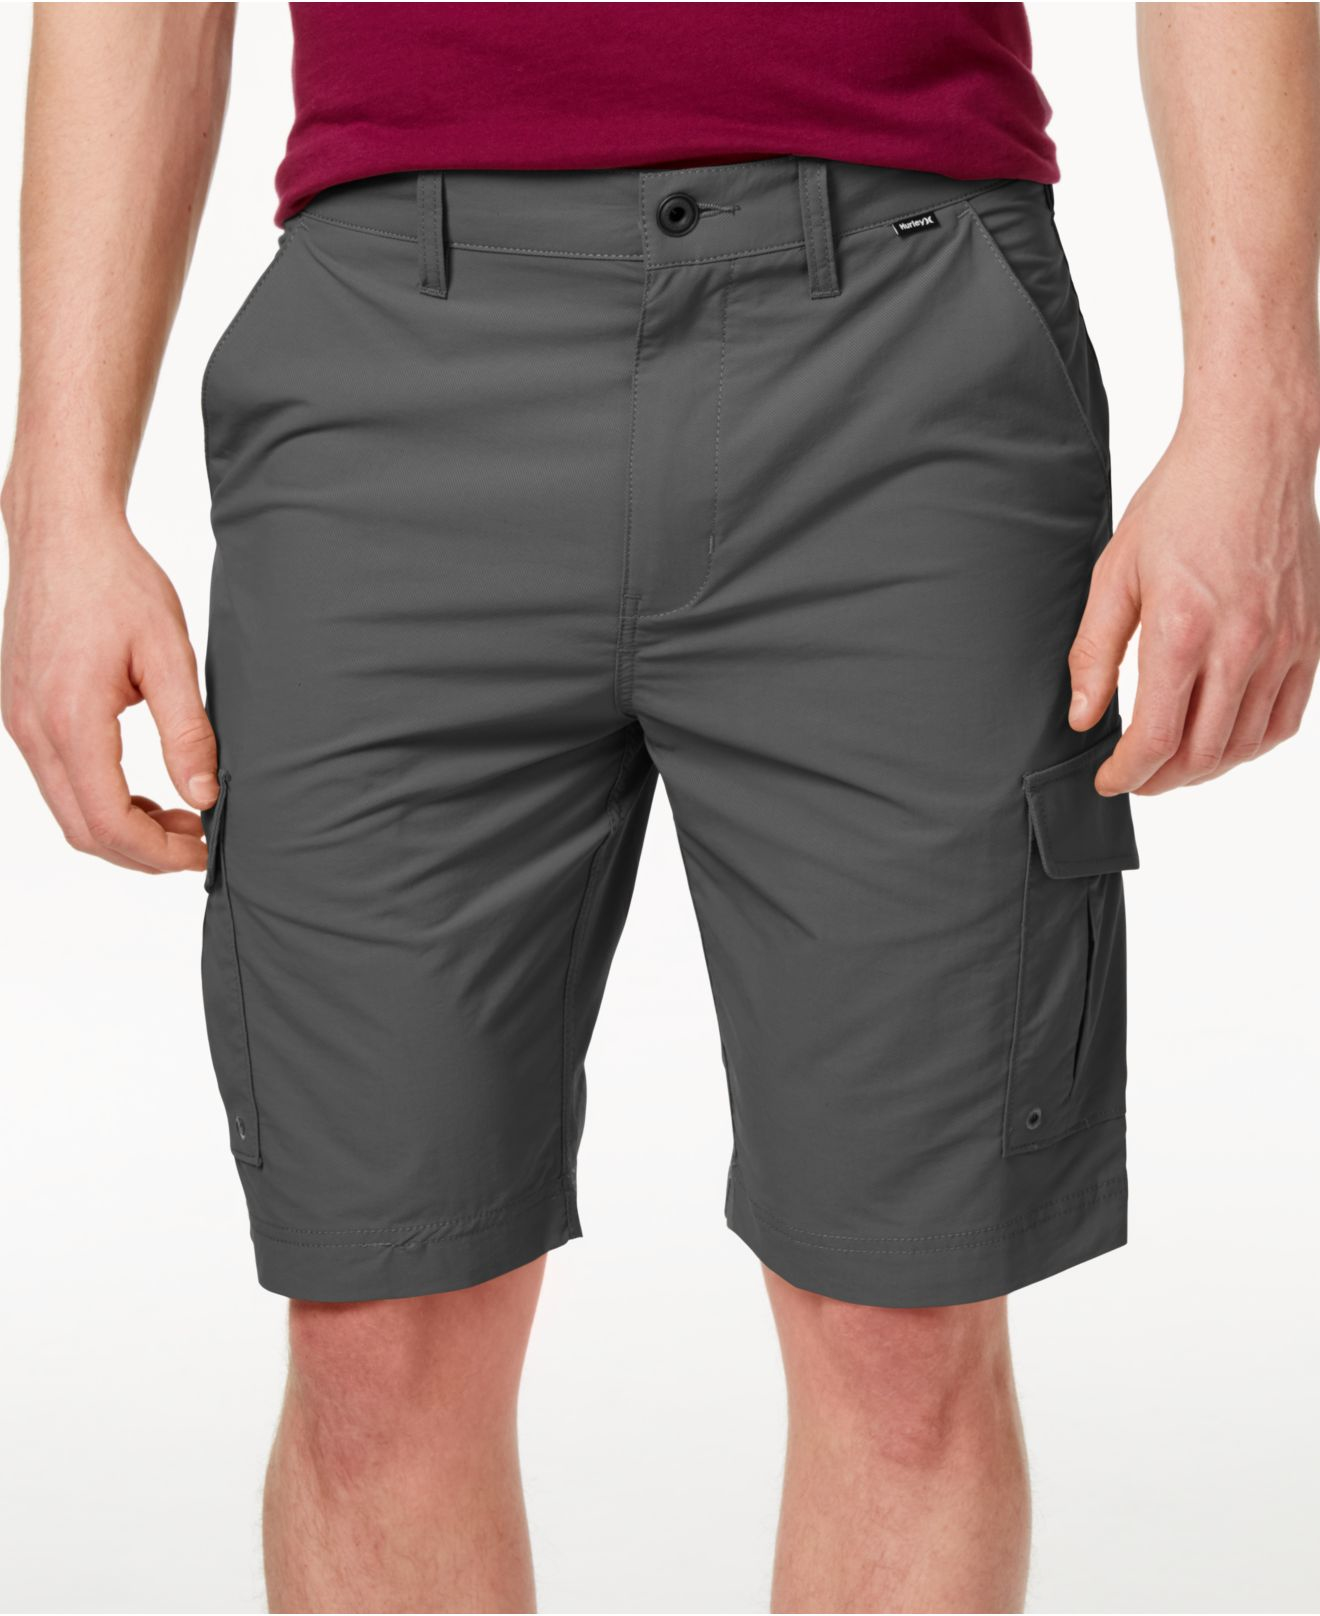 Dri-fit Cargo Shorts in Cool Grey (Gray 